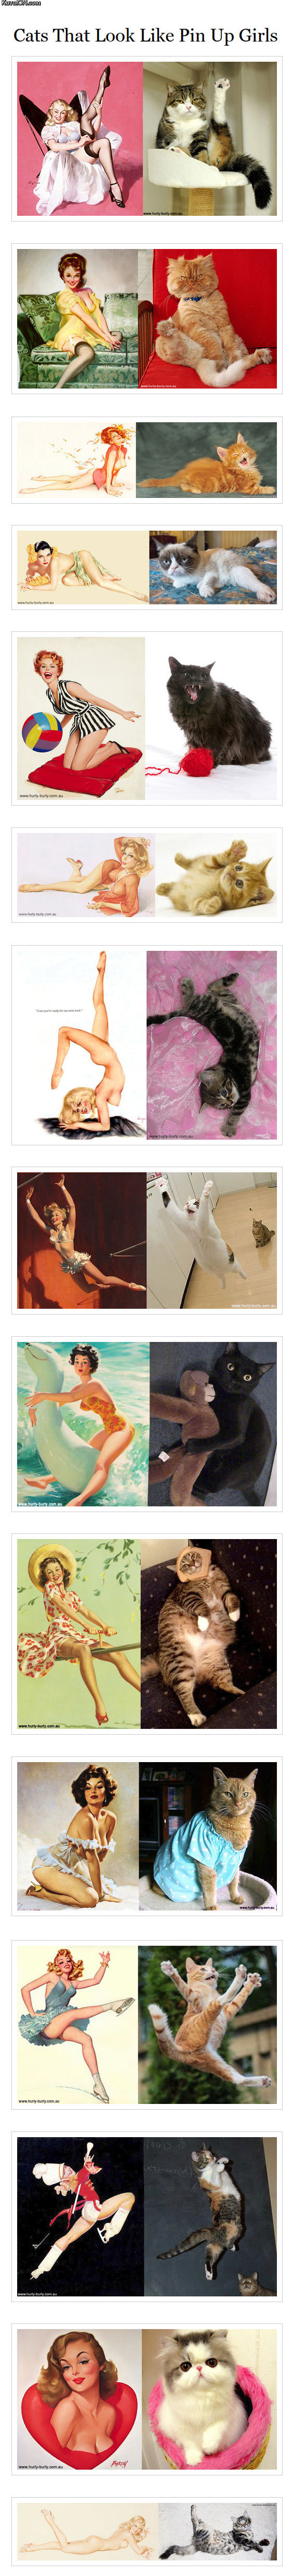 cats_that_look_like_pin_up_girls.jpg